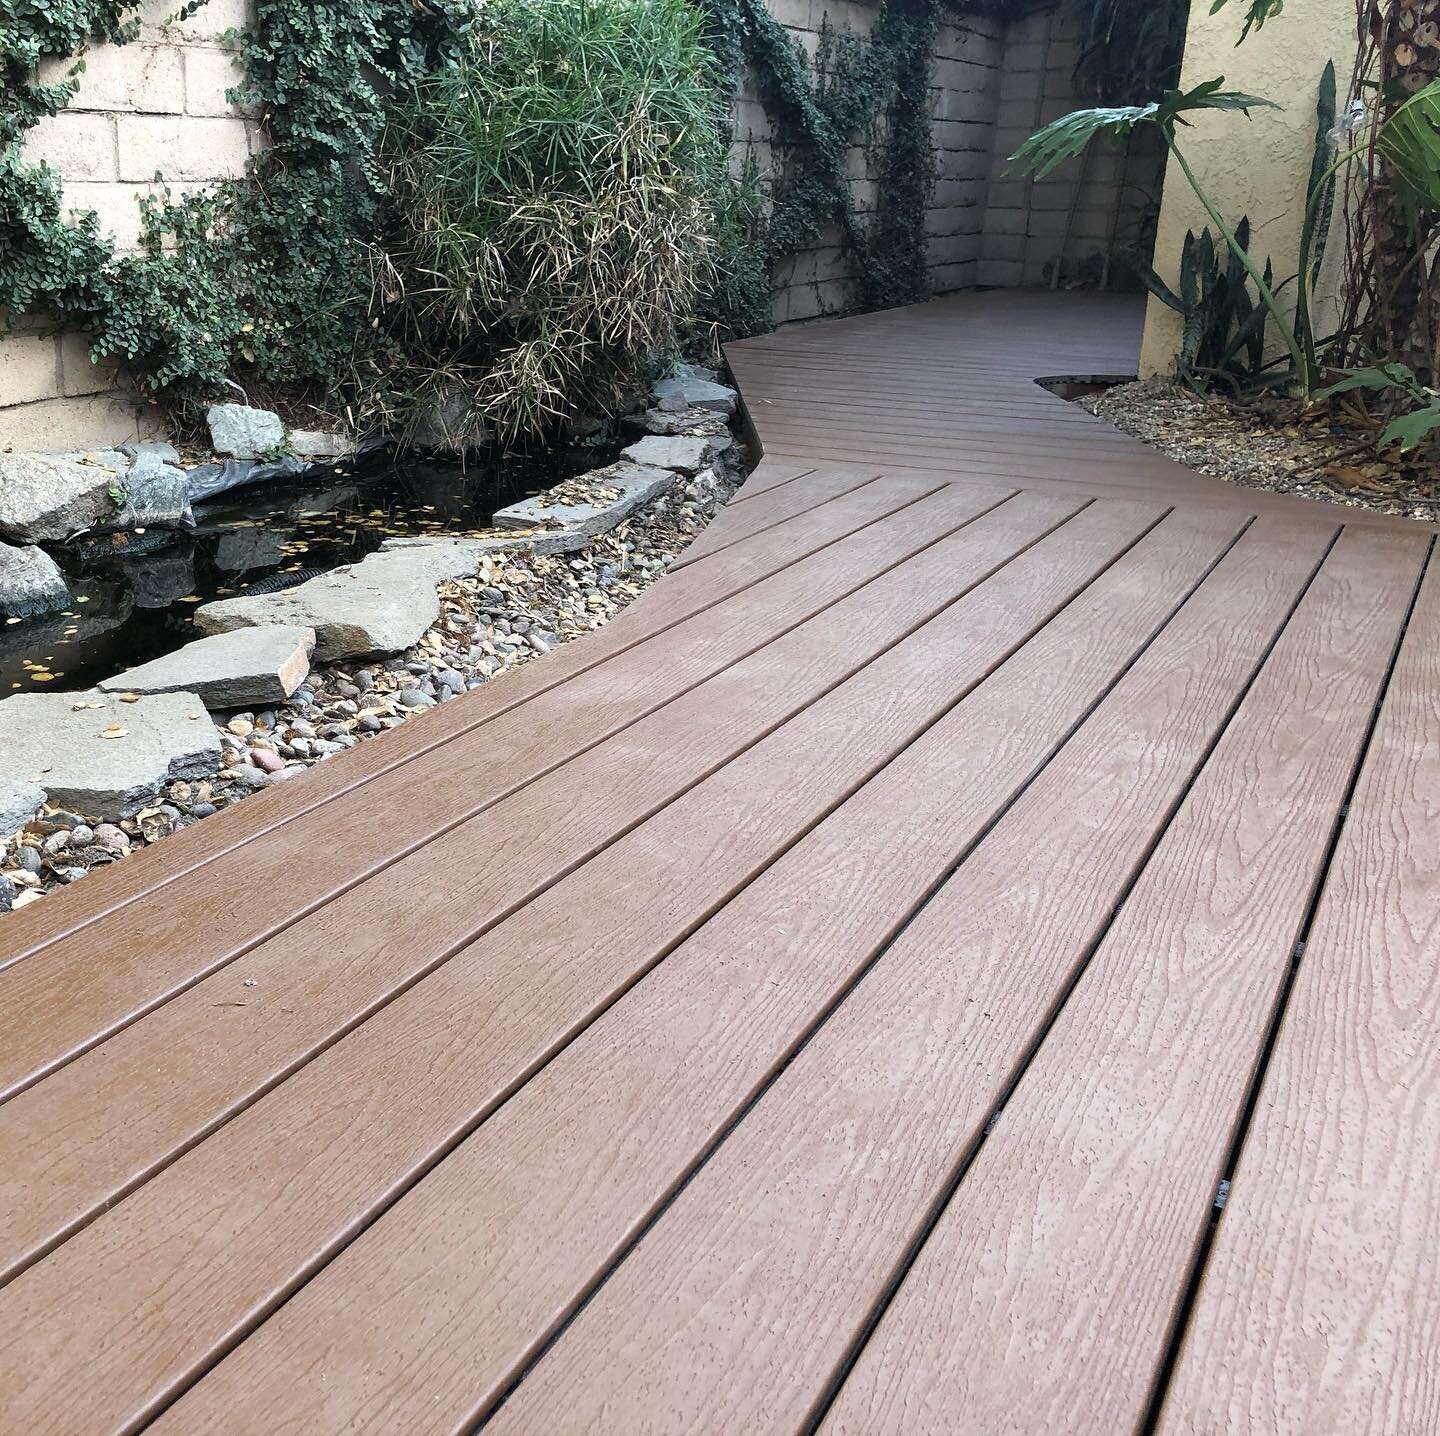 Another happy client! Hidden hardware #trex #deck turned out amazing. Super clean lines that last. @bennett.t and @tonymb714 knocked it out of the park